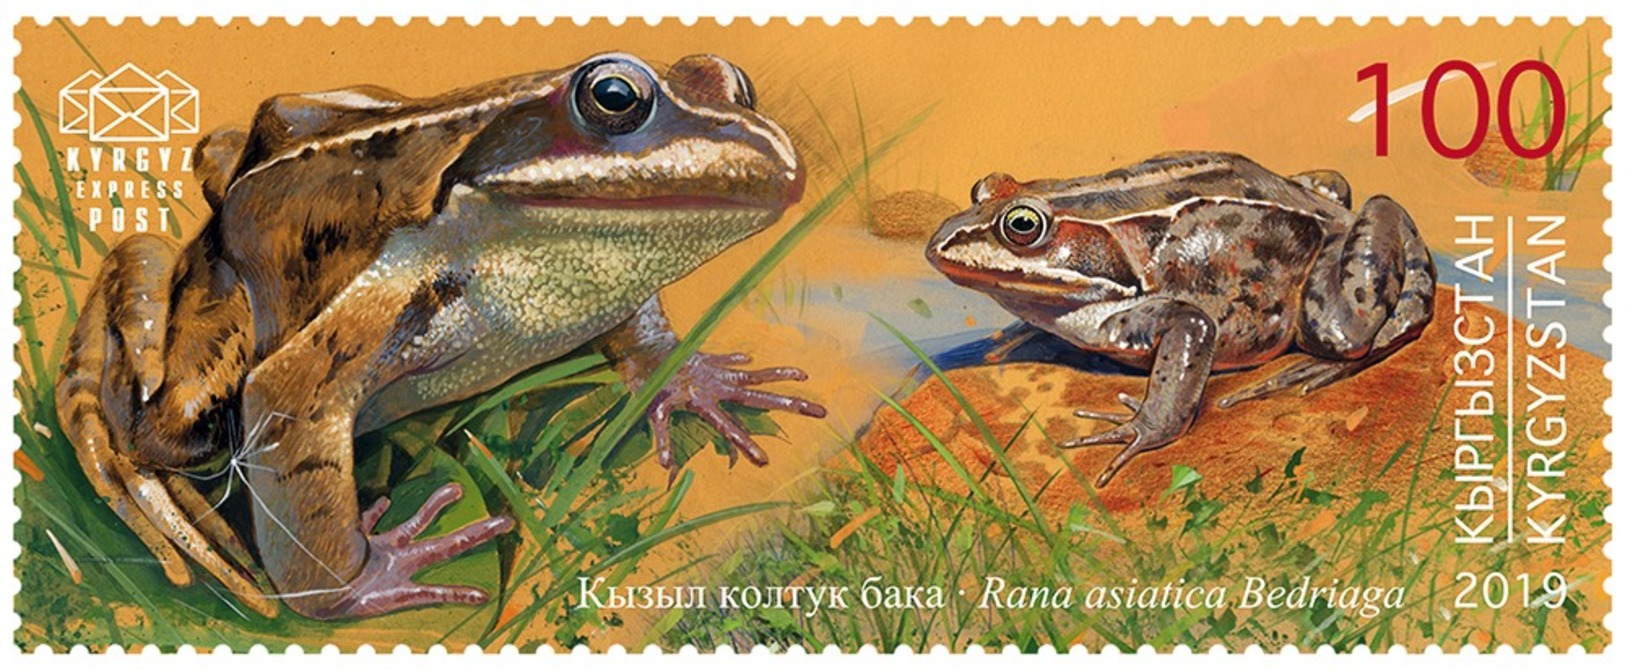 H01 Kyrgyzstan Red List Red Book Rote Liste Reptiles Frogs Snakes 2019 Mi# 134 MNH - Kirgisistan